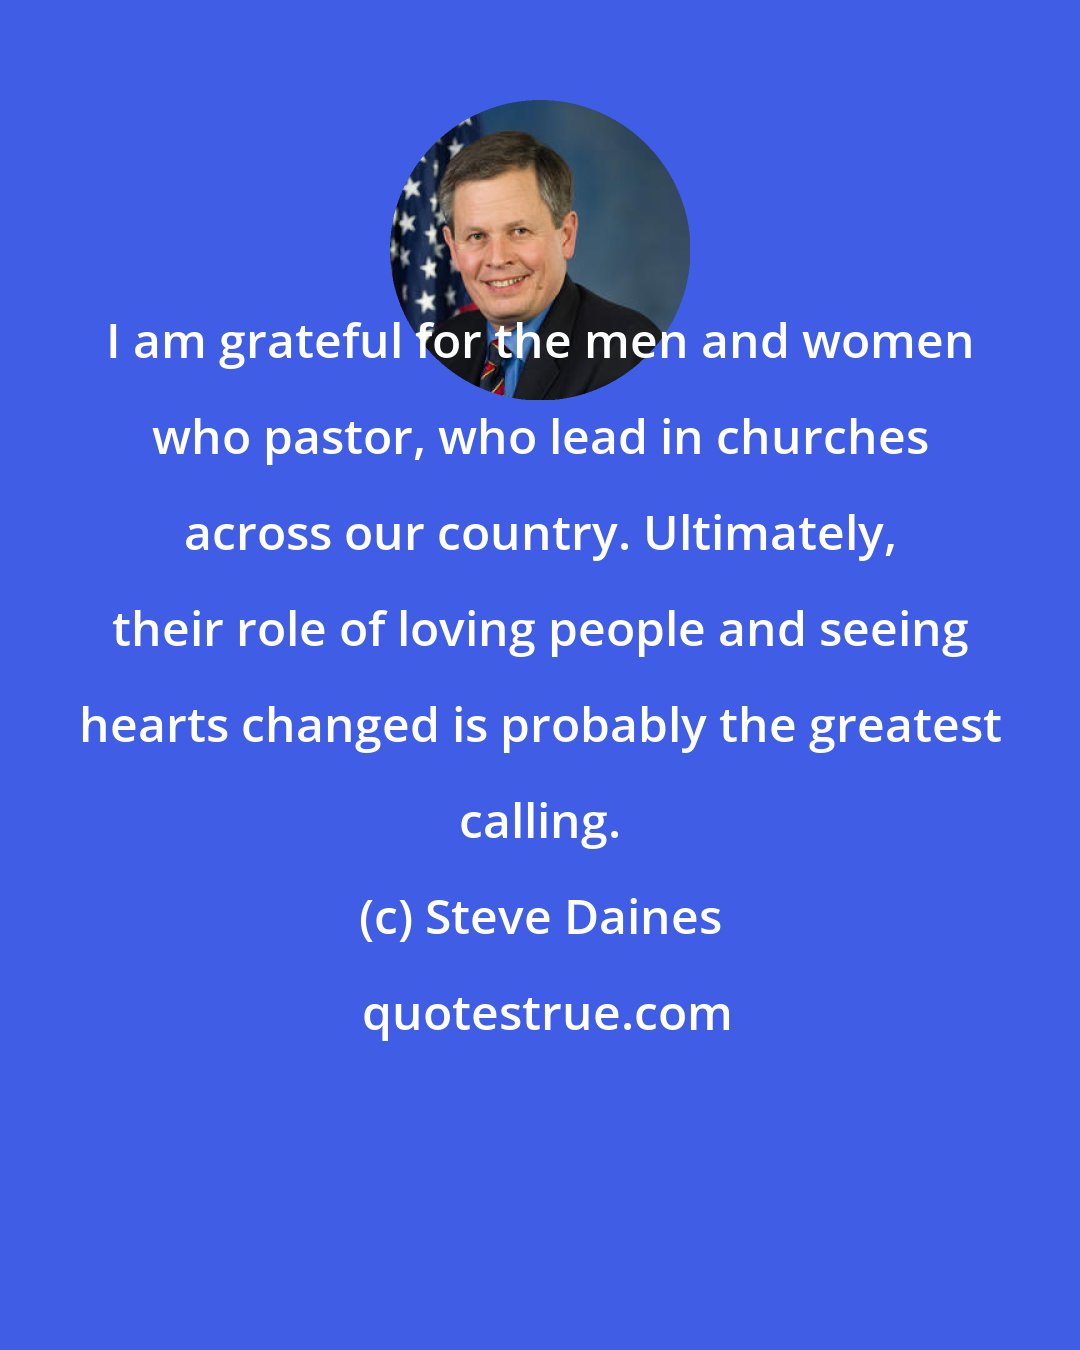 Steve Daines: I am grateful for the men and women who pastor, who lead in churches across our country. Ultimately, their role of loving people and seeing hearts changed is probably the greatest calling.